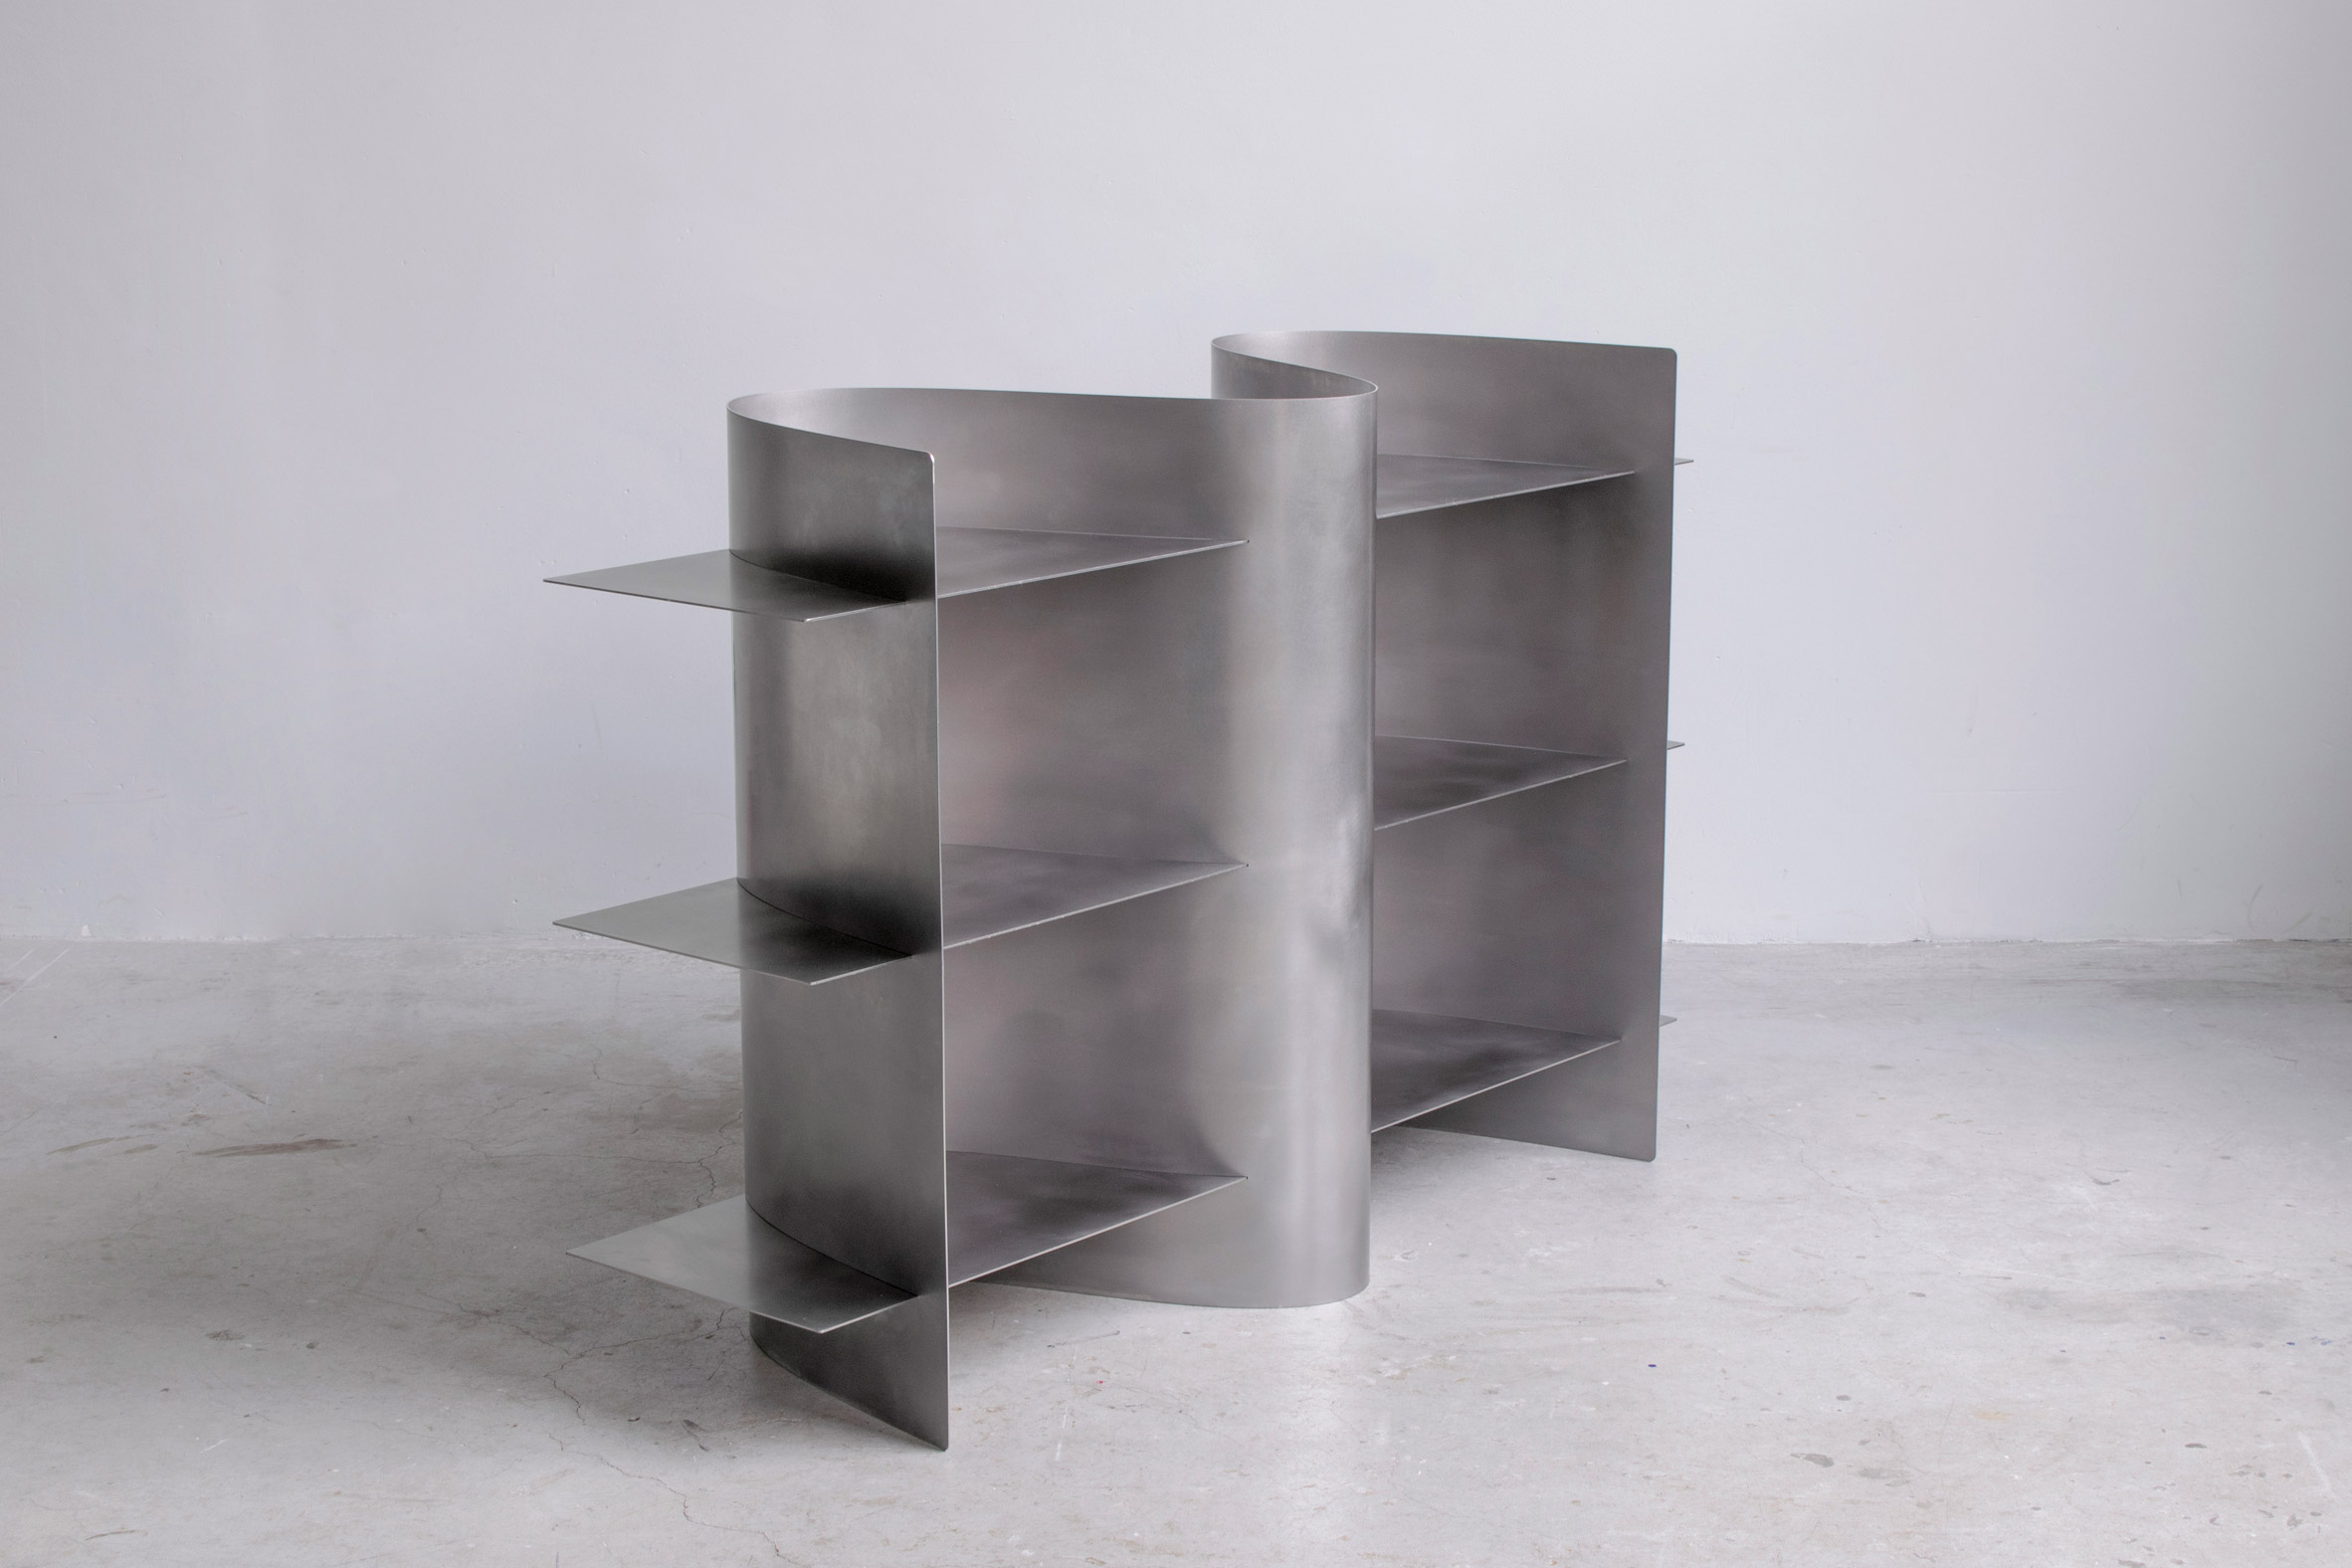 Tension shelf made from stainless steel